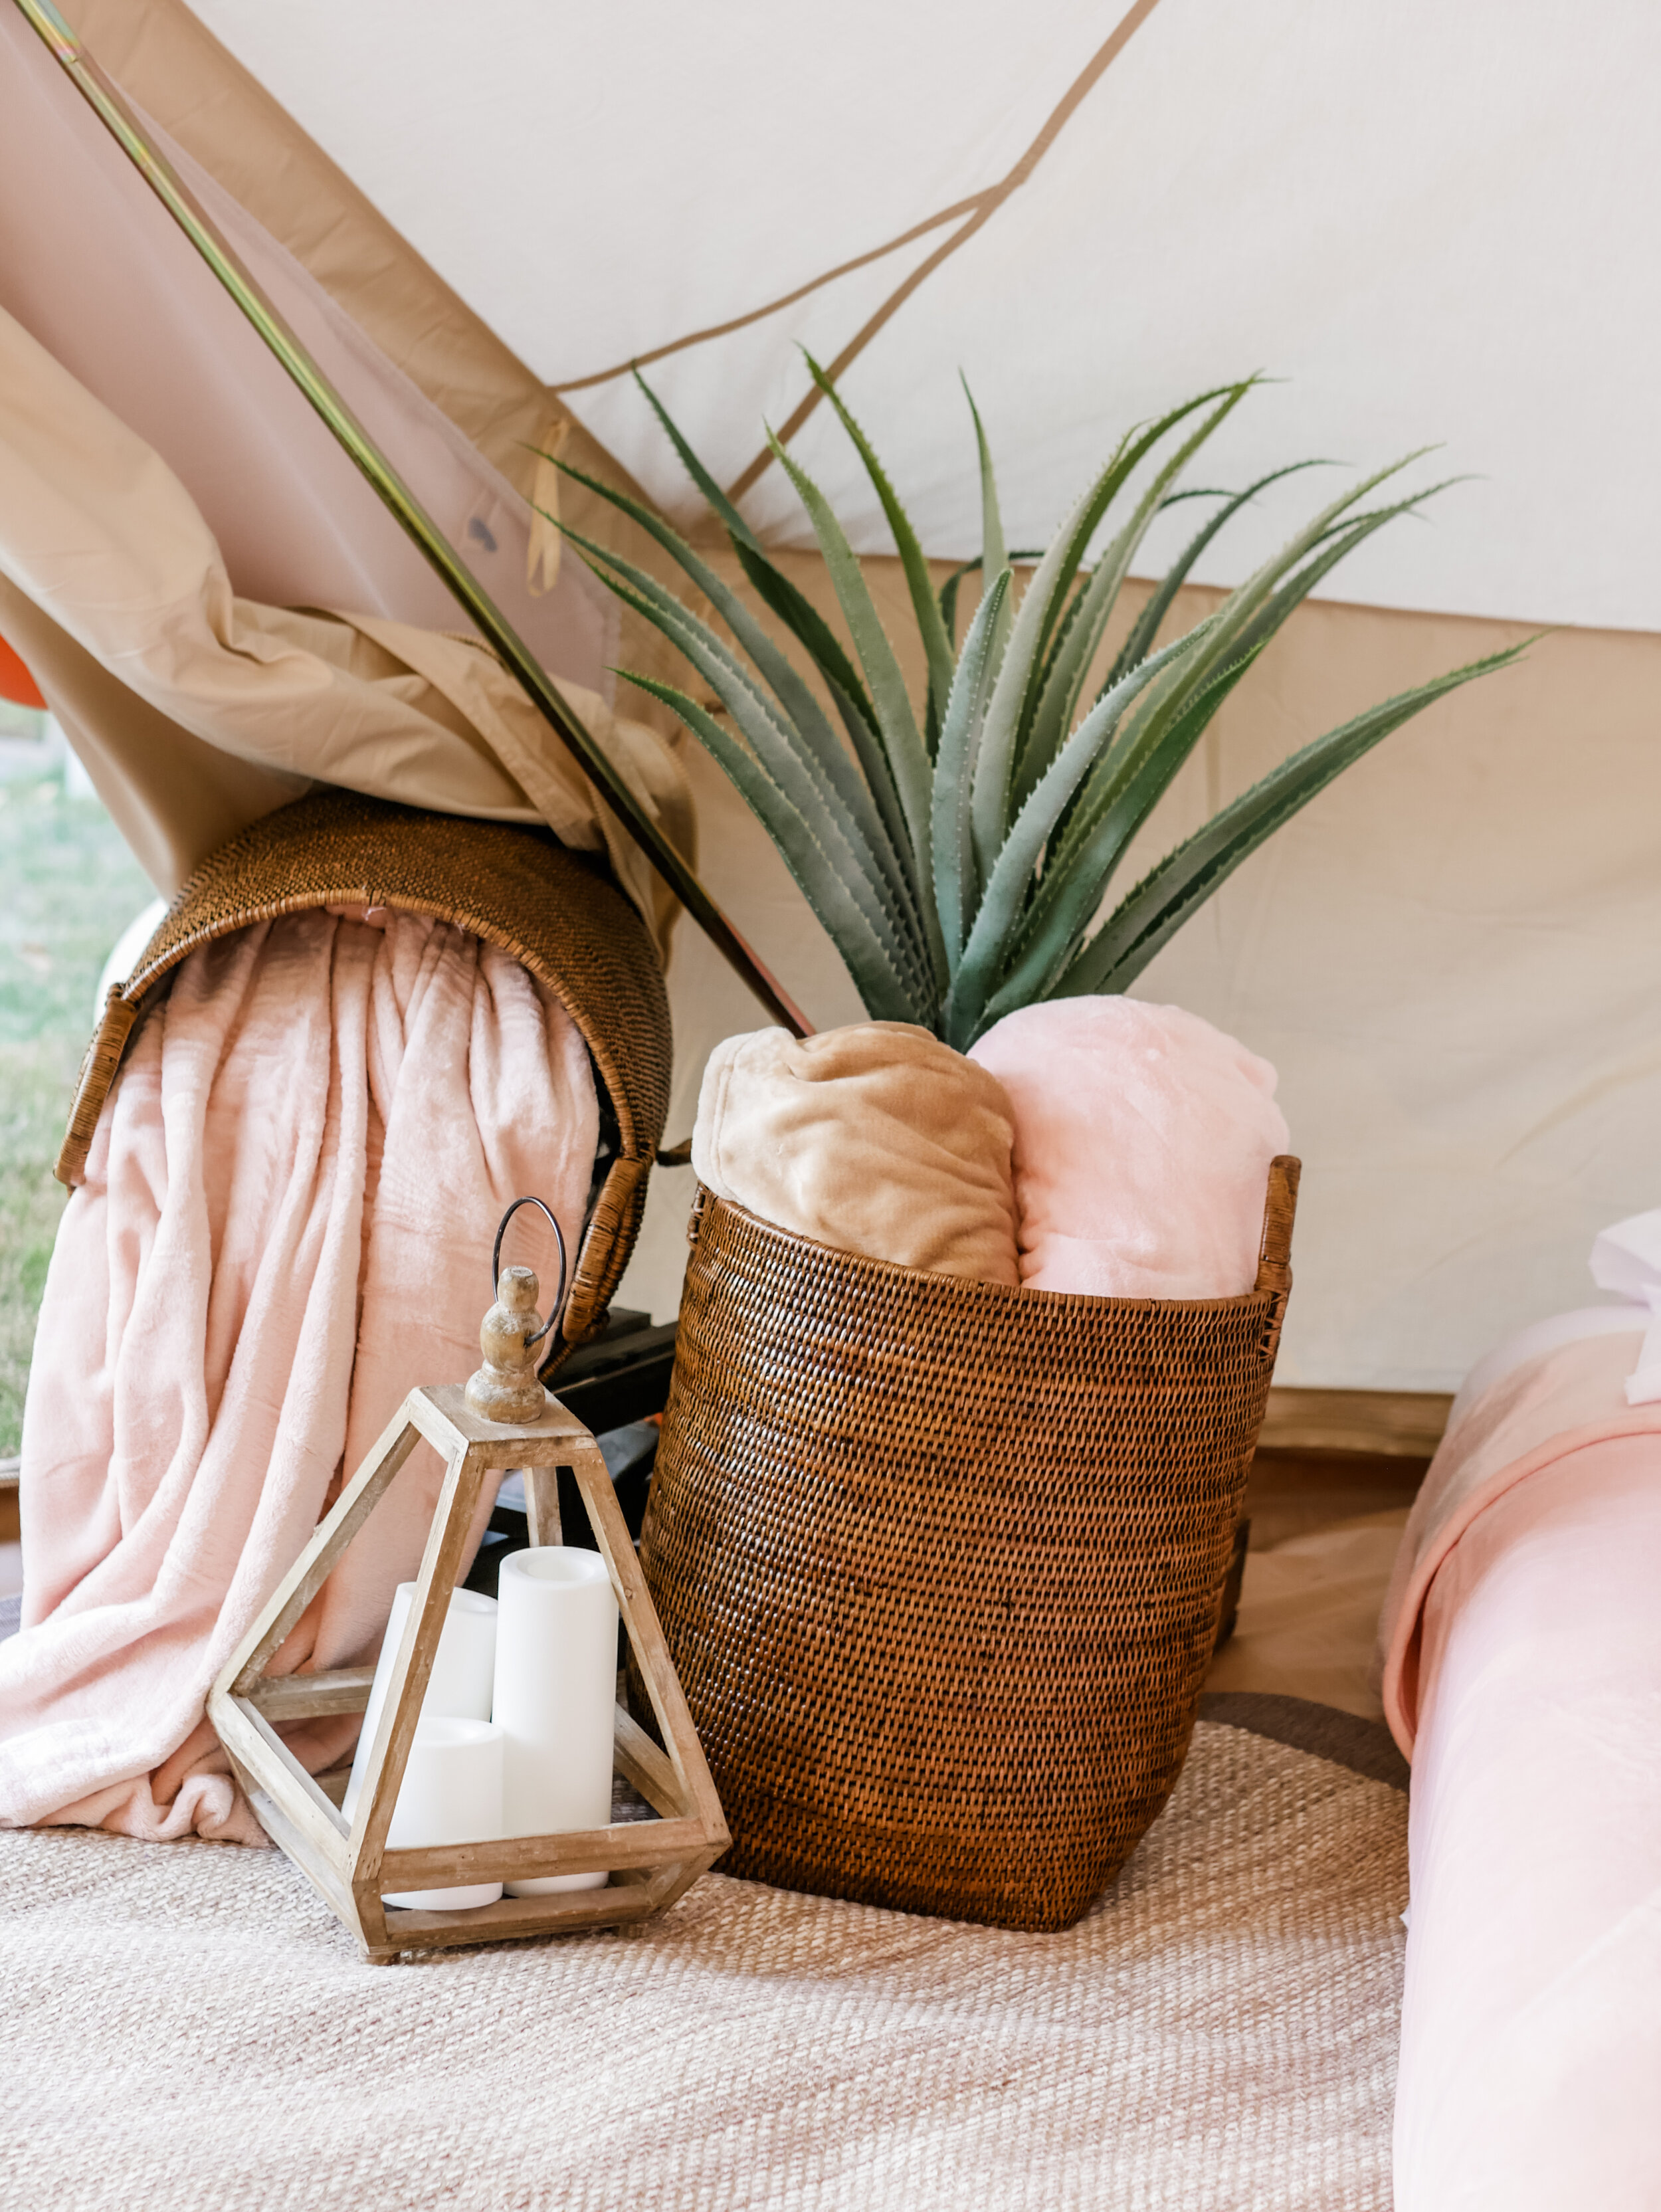  Boho Chic luxury backyard Glamping experience - with large rentable tent and picnic area from MINT Event Design in Austin, TX! Perfect for teen slumber parties, birthday parties, or bachelorette parties. See how event designer Carolina set up a boho